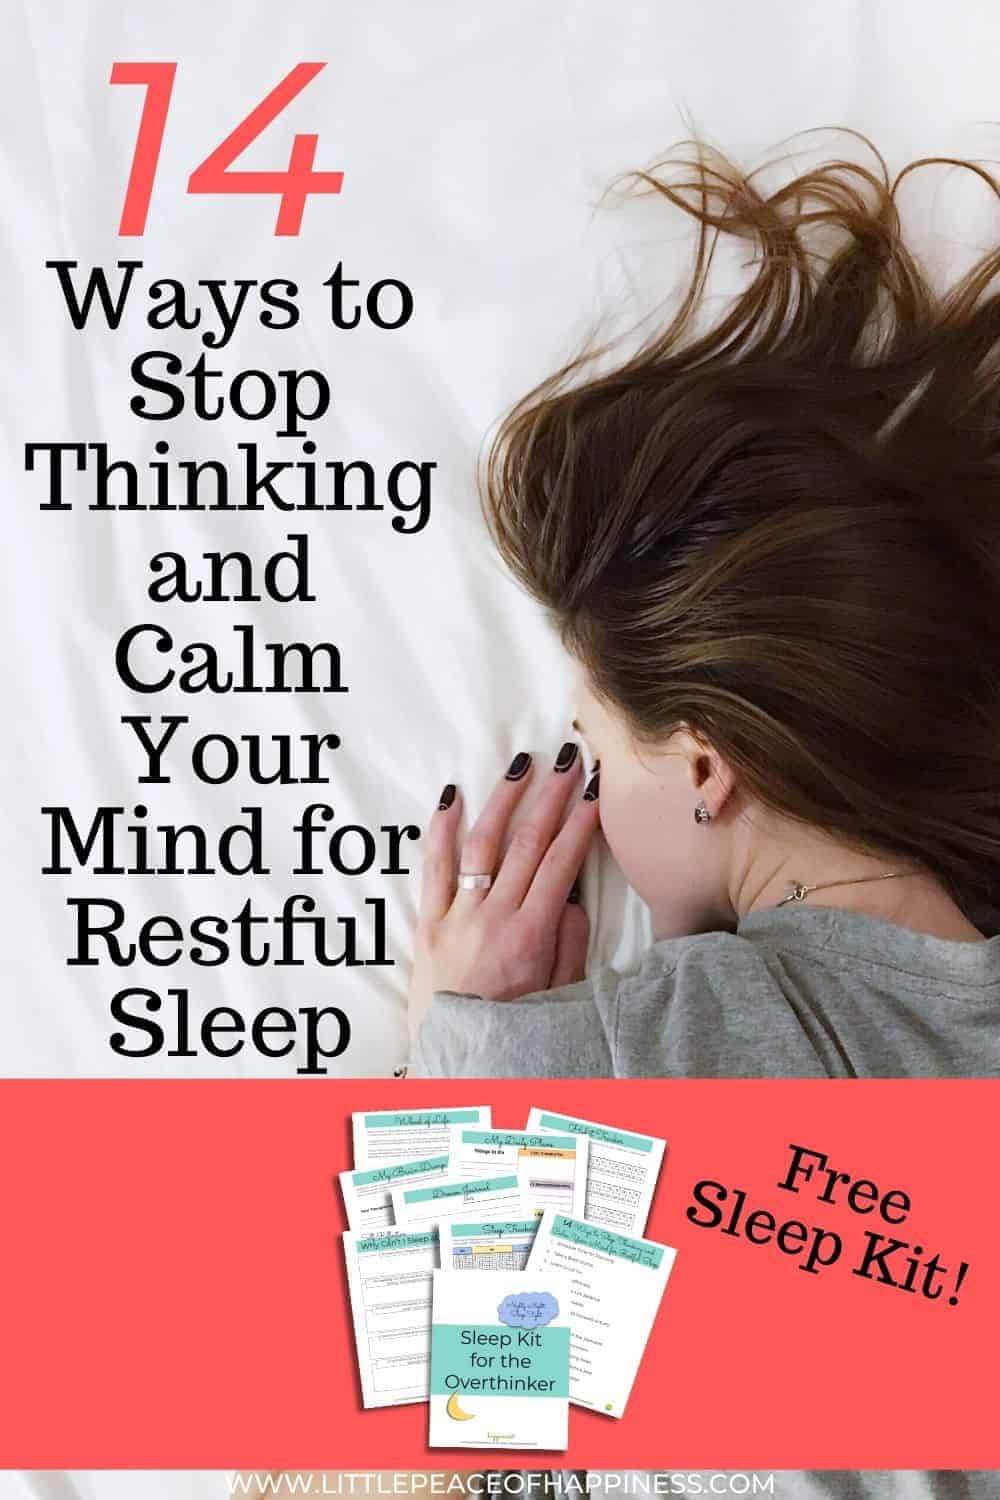 14 ways to stop thinking for restful sleep